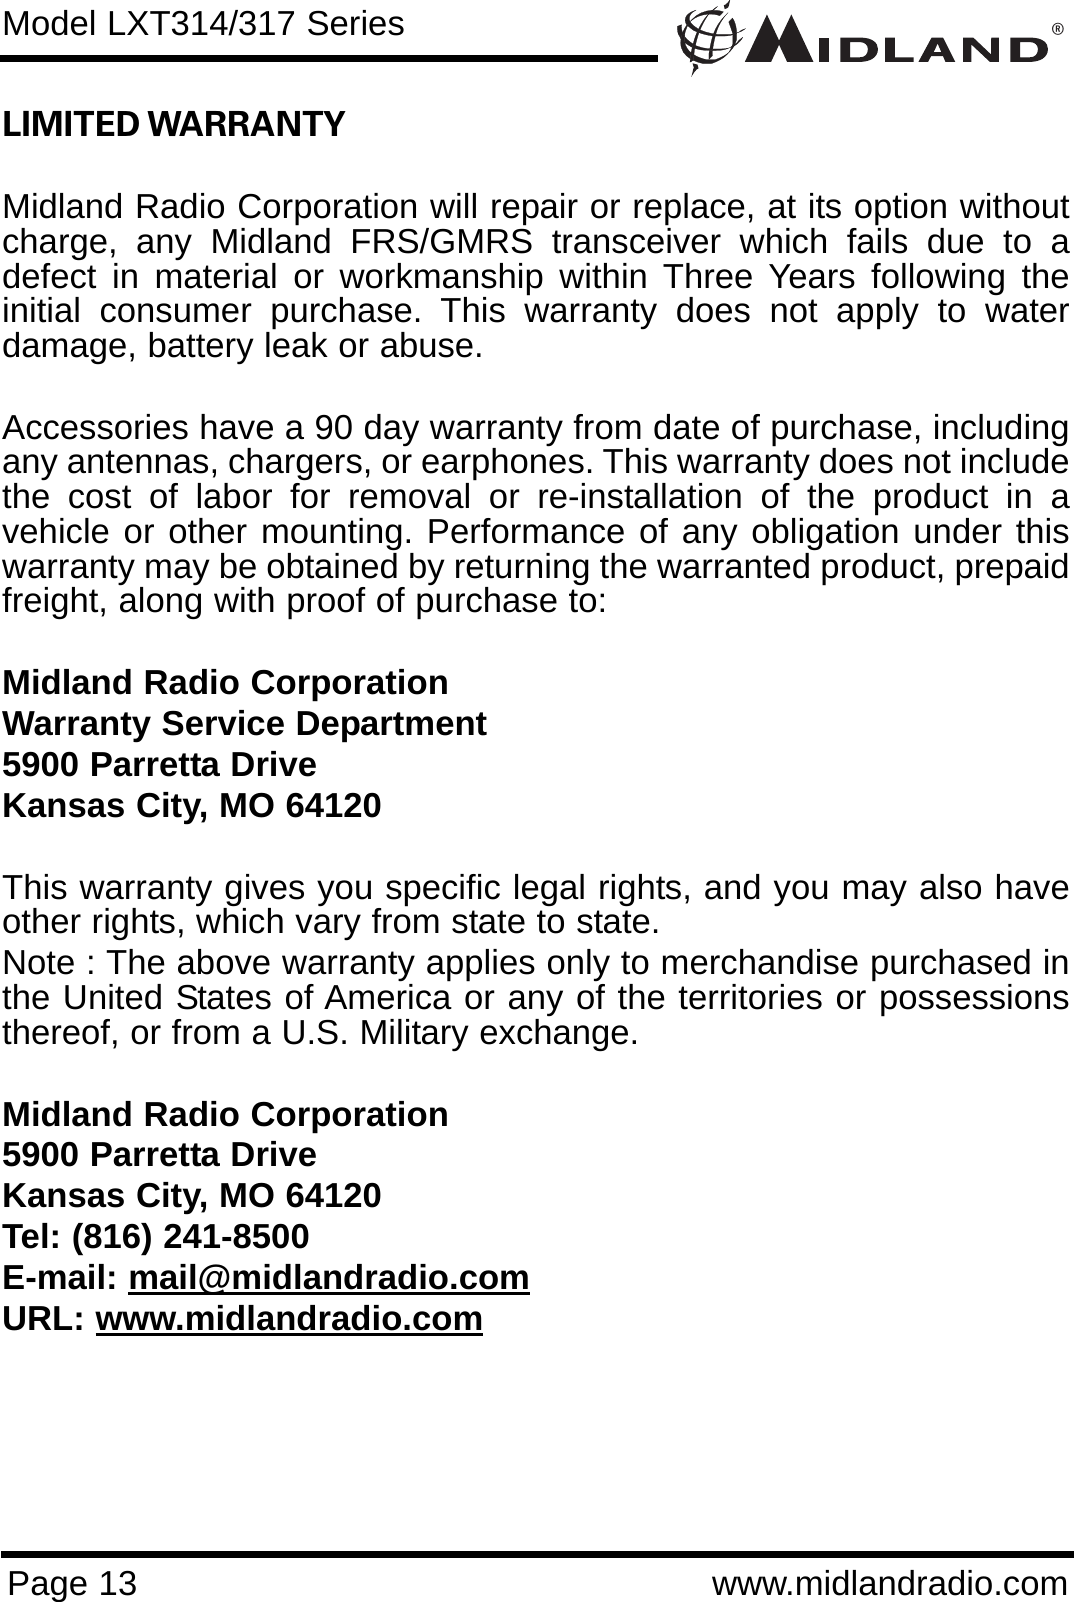 ®Page 13 www.midlandradio.comLIMITED WARRANTY Midland Radio Corporation will repair or replace, at its option withoutcharge, any Midland FRS/GMRS transceiver which fails due to adefect in material or workmanship within Three Years following theinitial consumer purchase. This warranty does not apply to waterdamage, battery leak or abuse.Accessories have a 90 day warranty from date of purchase, includingany antennas, chargers, or earphones. This warranty does not includethe cost of labor for removal or re-installation of the product in avehicle or other mounting. Performance of any obligation under thiswarranty may be obtained by returning the warranted product, prepaidfreight, along with proof of purchase to:Midland Radio CorporationWarranty Service Department5900 Parretta DriveKansas City, MO 64120This warranty gives you specific legal rights, and you may also haveother rights, which vary from state to state.Note : The above warranty applies only to merchandise purchased inthe United States of America or any of the territories or possessionsthereof, or from a U.S. Military exchange.Midland Radio Corporation5900 Parretta DriveKansas City, MO 64120Tel: (816) 241-8500E-mail: mail@midlandradio.comURL: www.midlandradio.comModel LXT314/317 Series